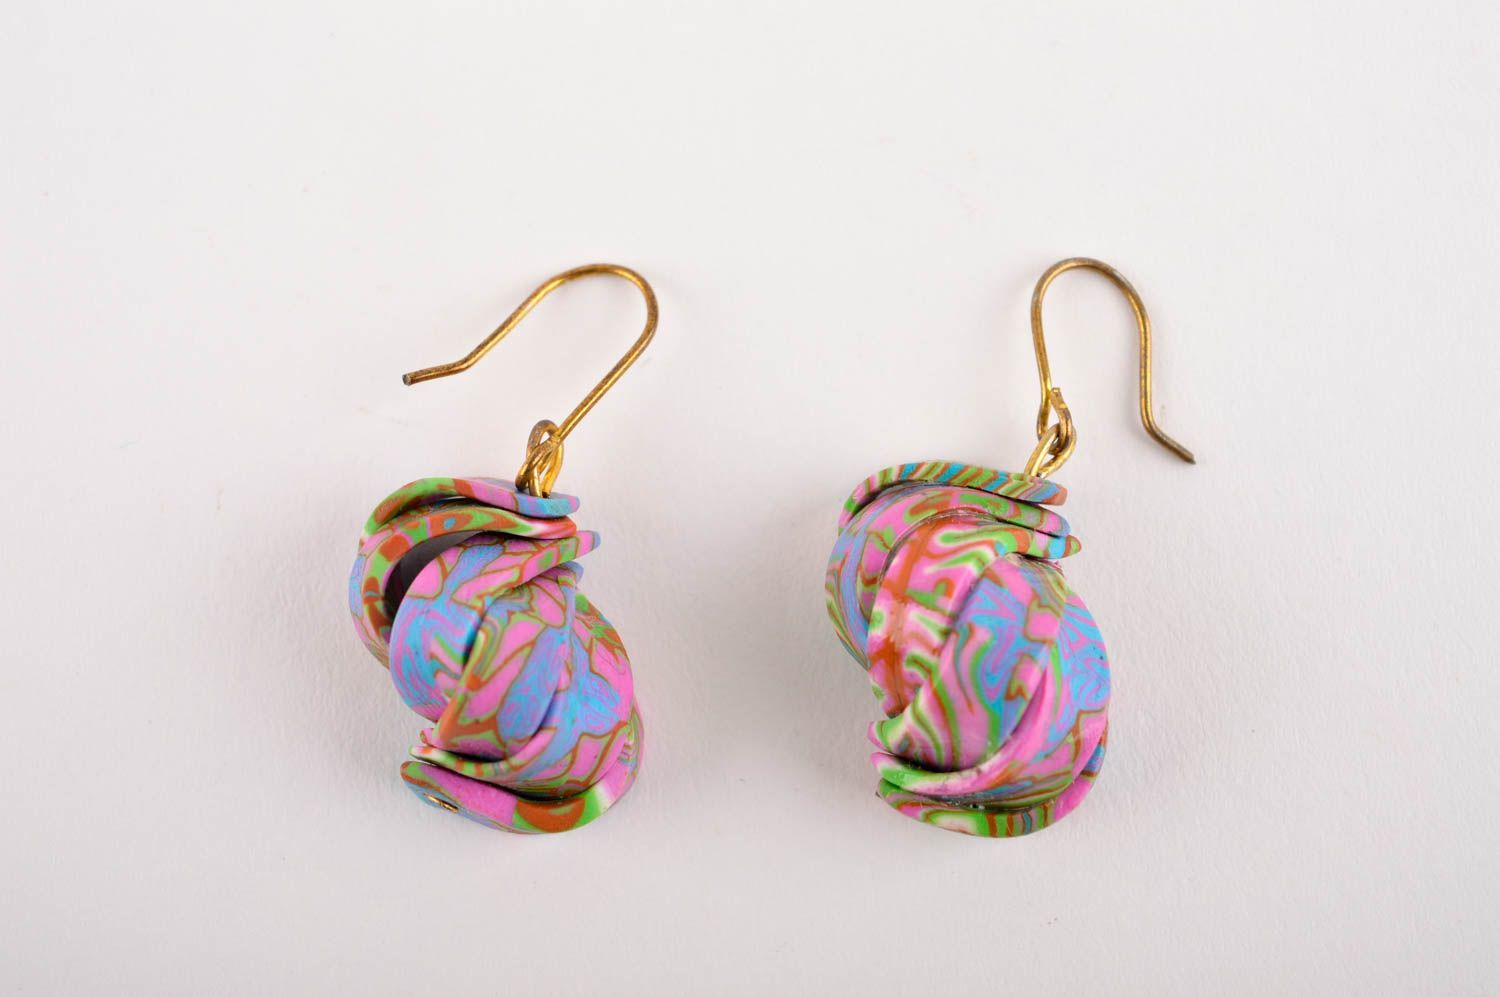 Bright handmade plastic earrings artisan jewelry designs best gifts for her photo 3